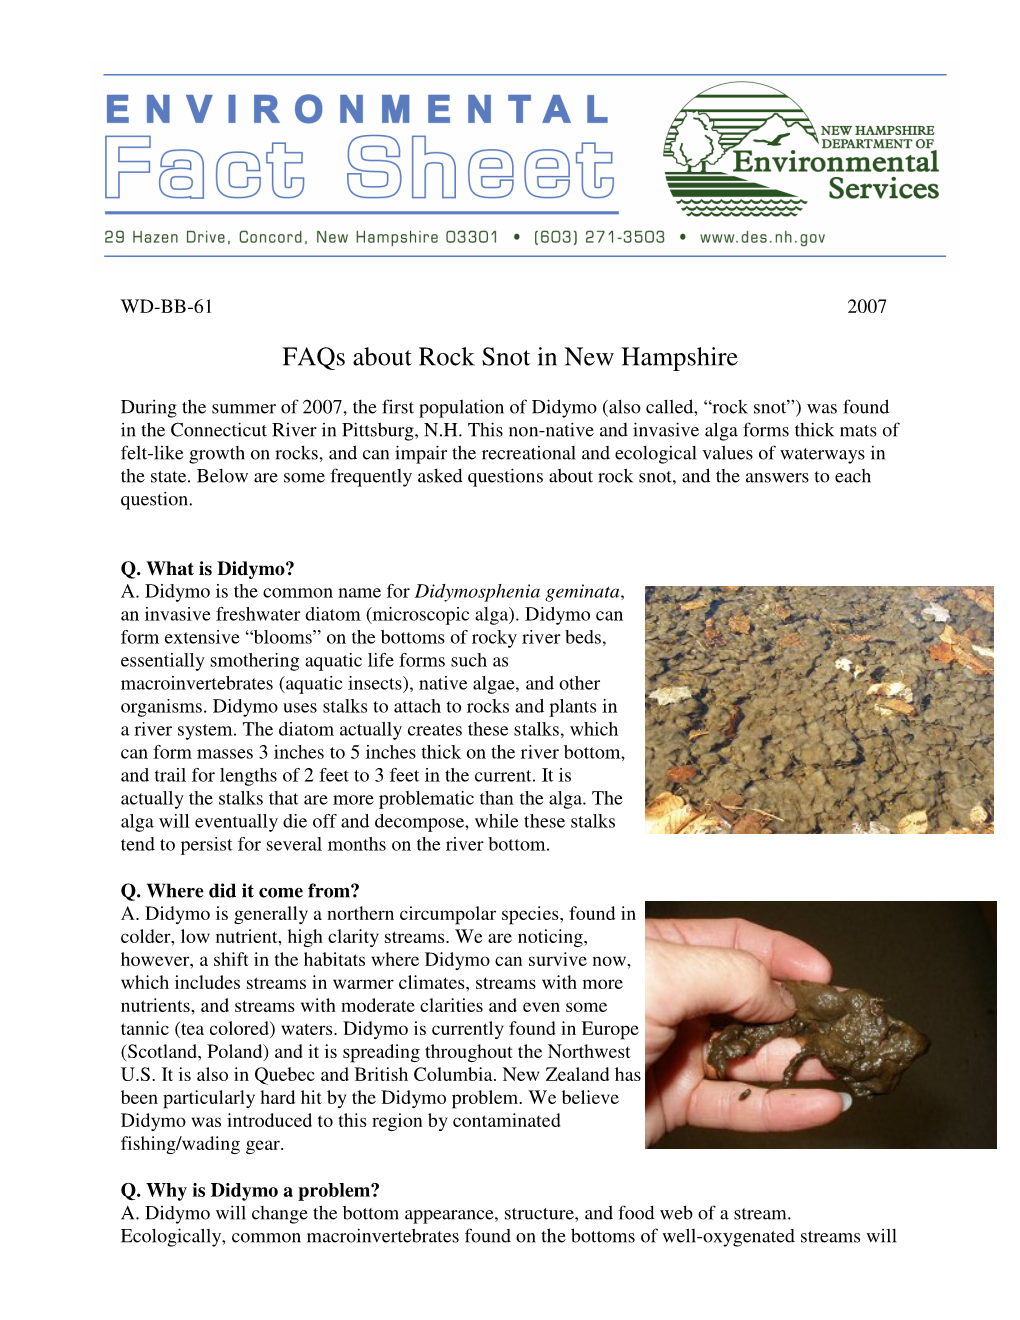 Faqs About Rock Snot in New Hampshire